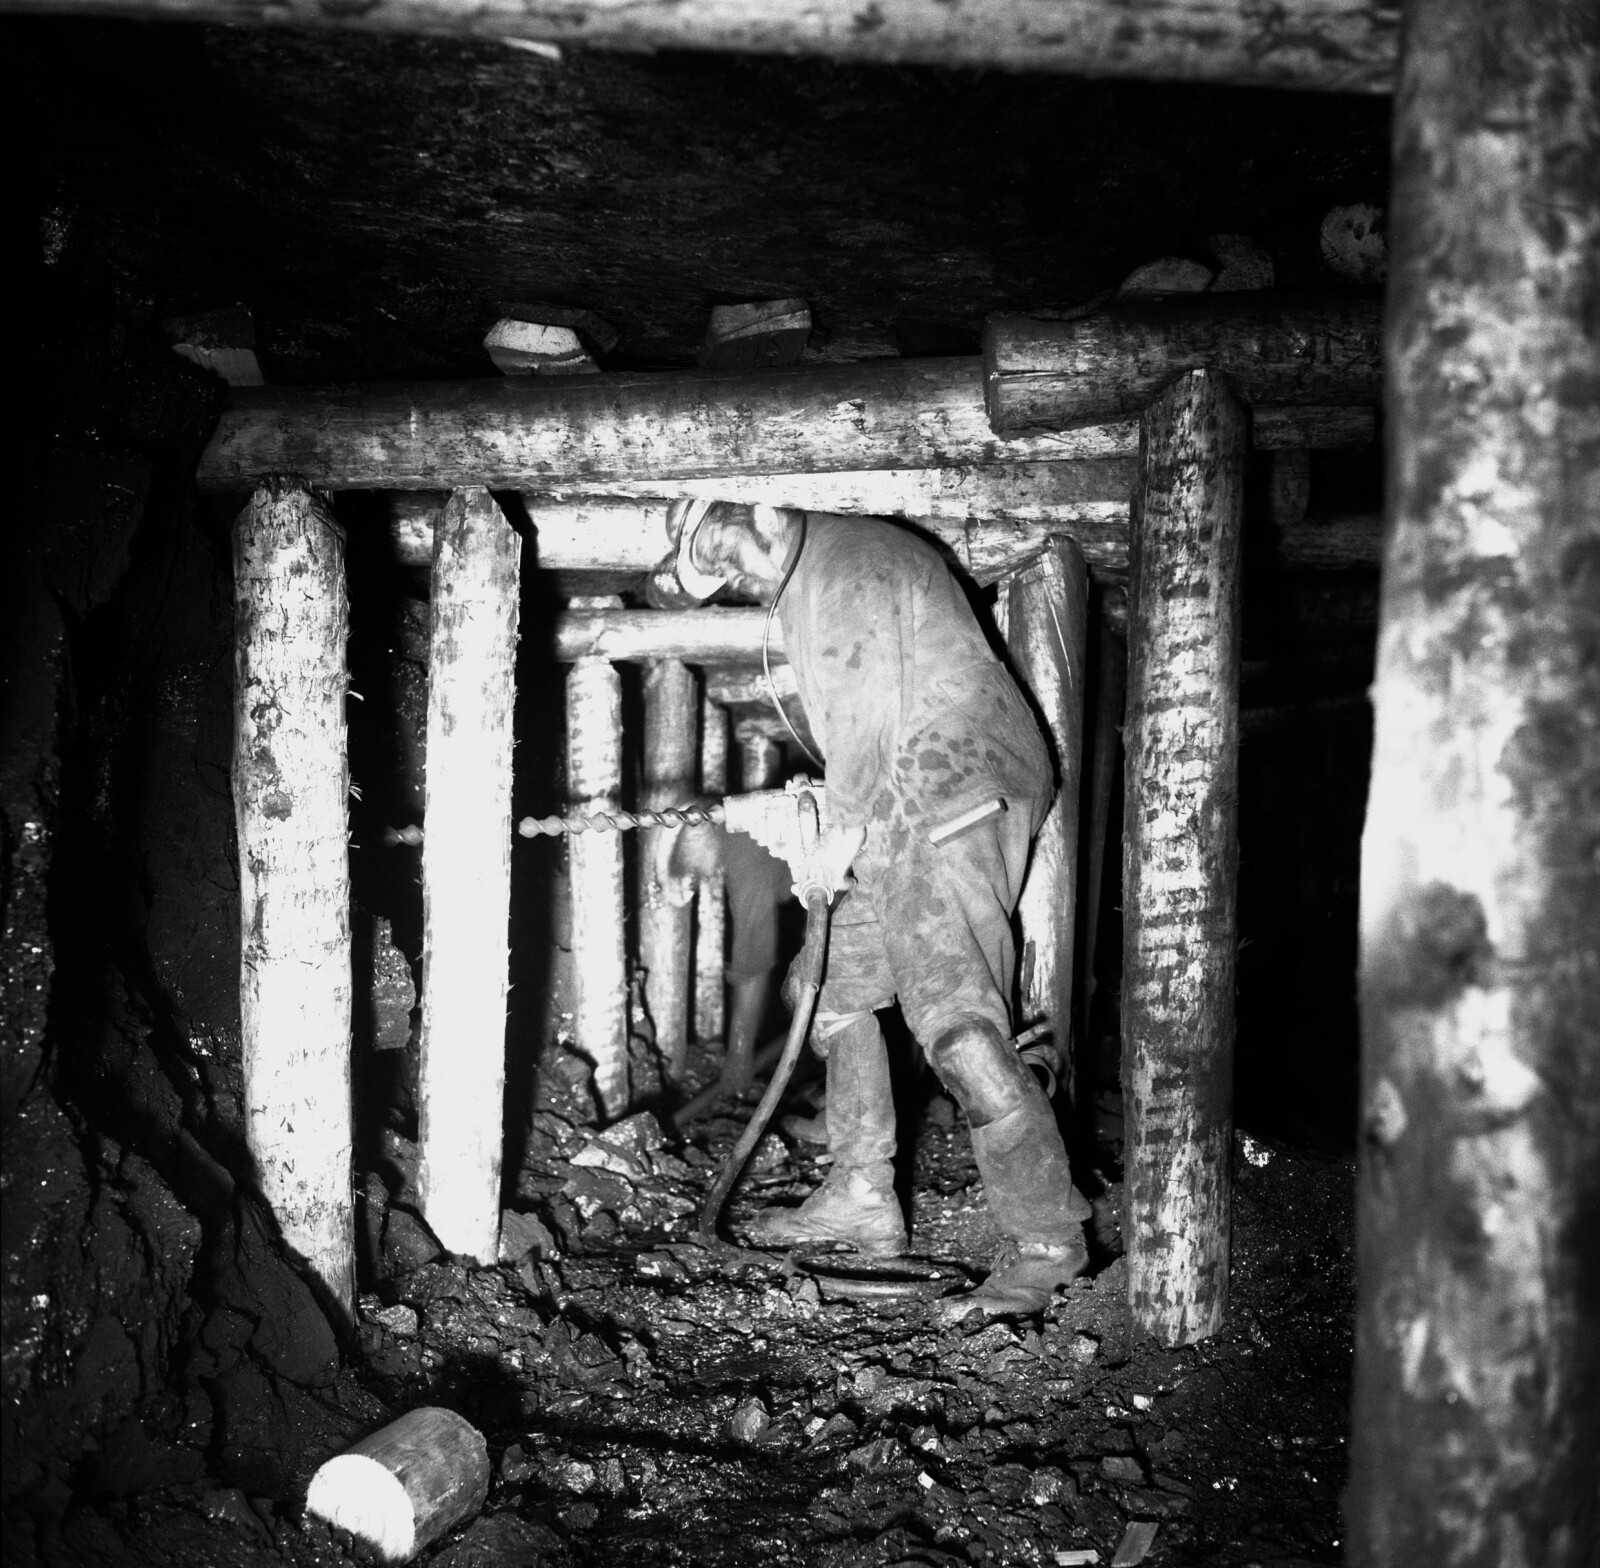 Ammanford Colliery, 1974, Gerald Gibson drilling a shot hole on the coal face.